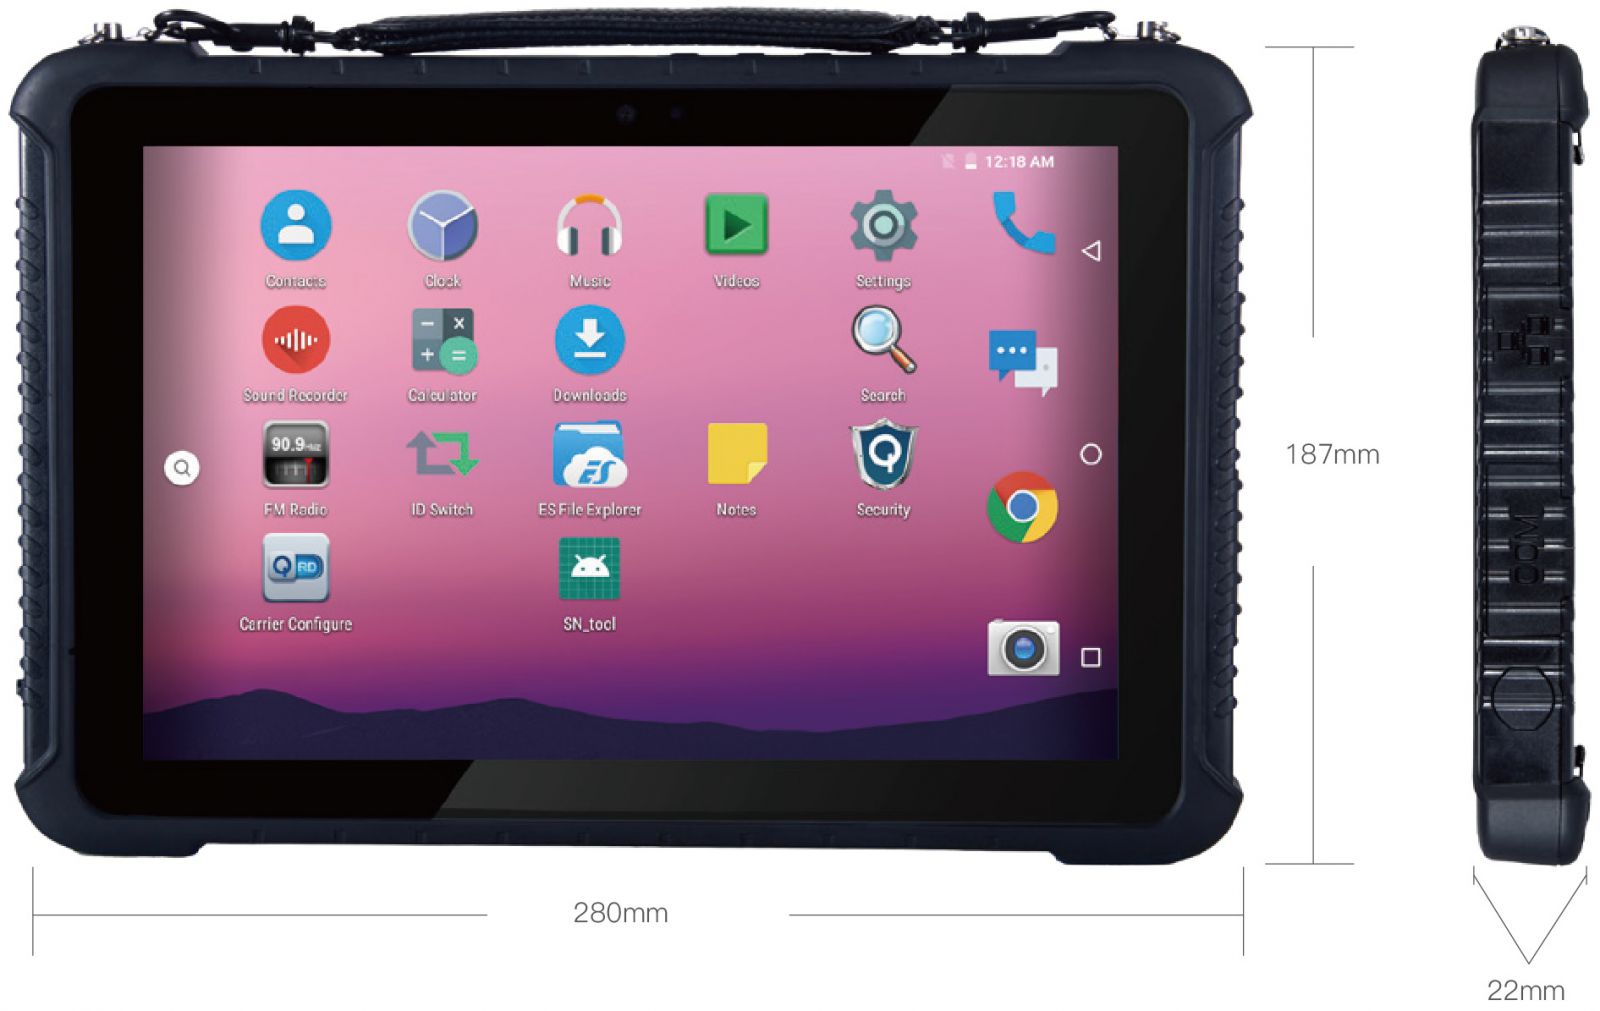 Emdoor Q16 v.4 - industrial waterproof tablet with Android 9.0 and NFC, AR Film, 64GB disk and 4GB RAM, IP65 standard, BT 4.1 